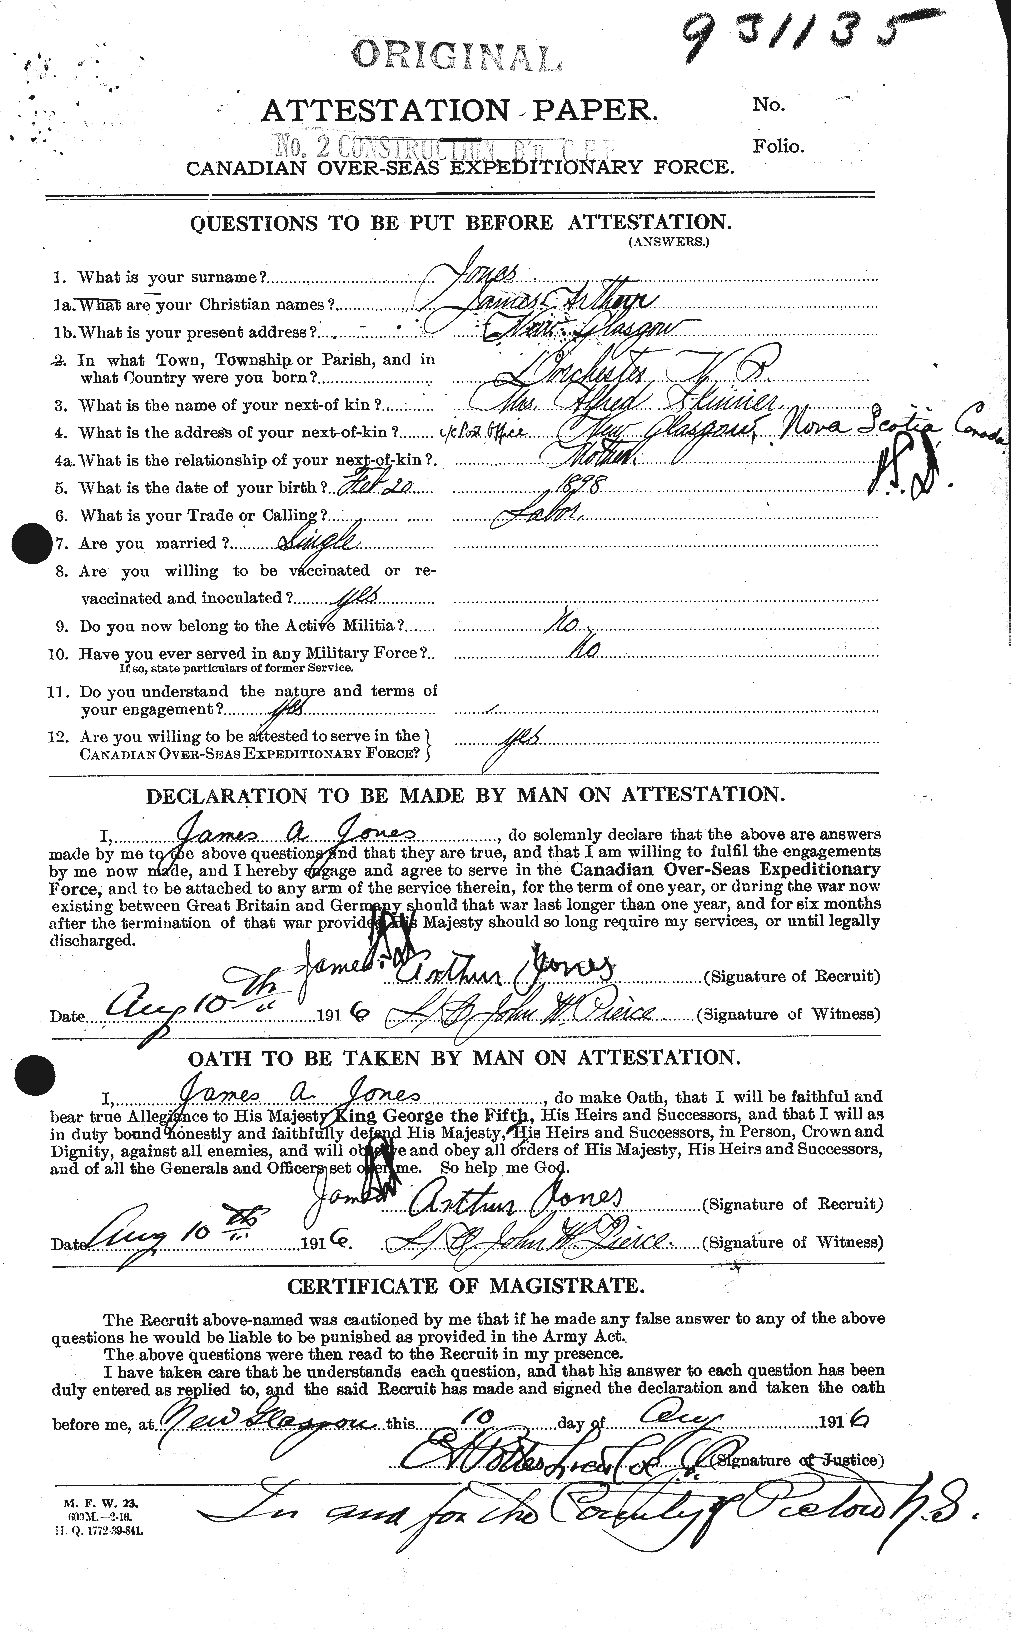 Personnel Records of the First World War - CEF 427394a